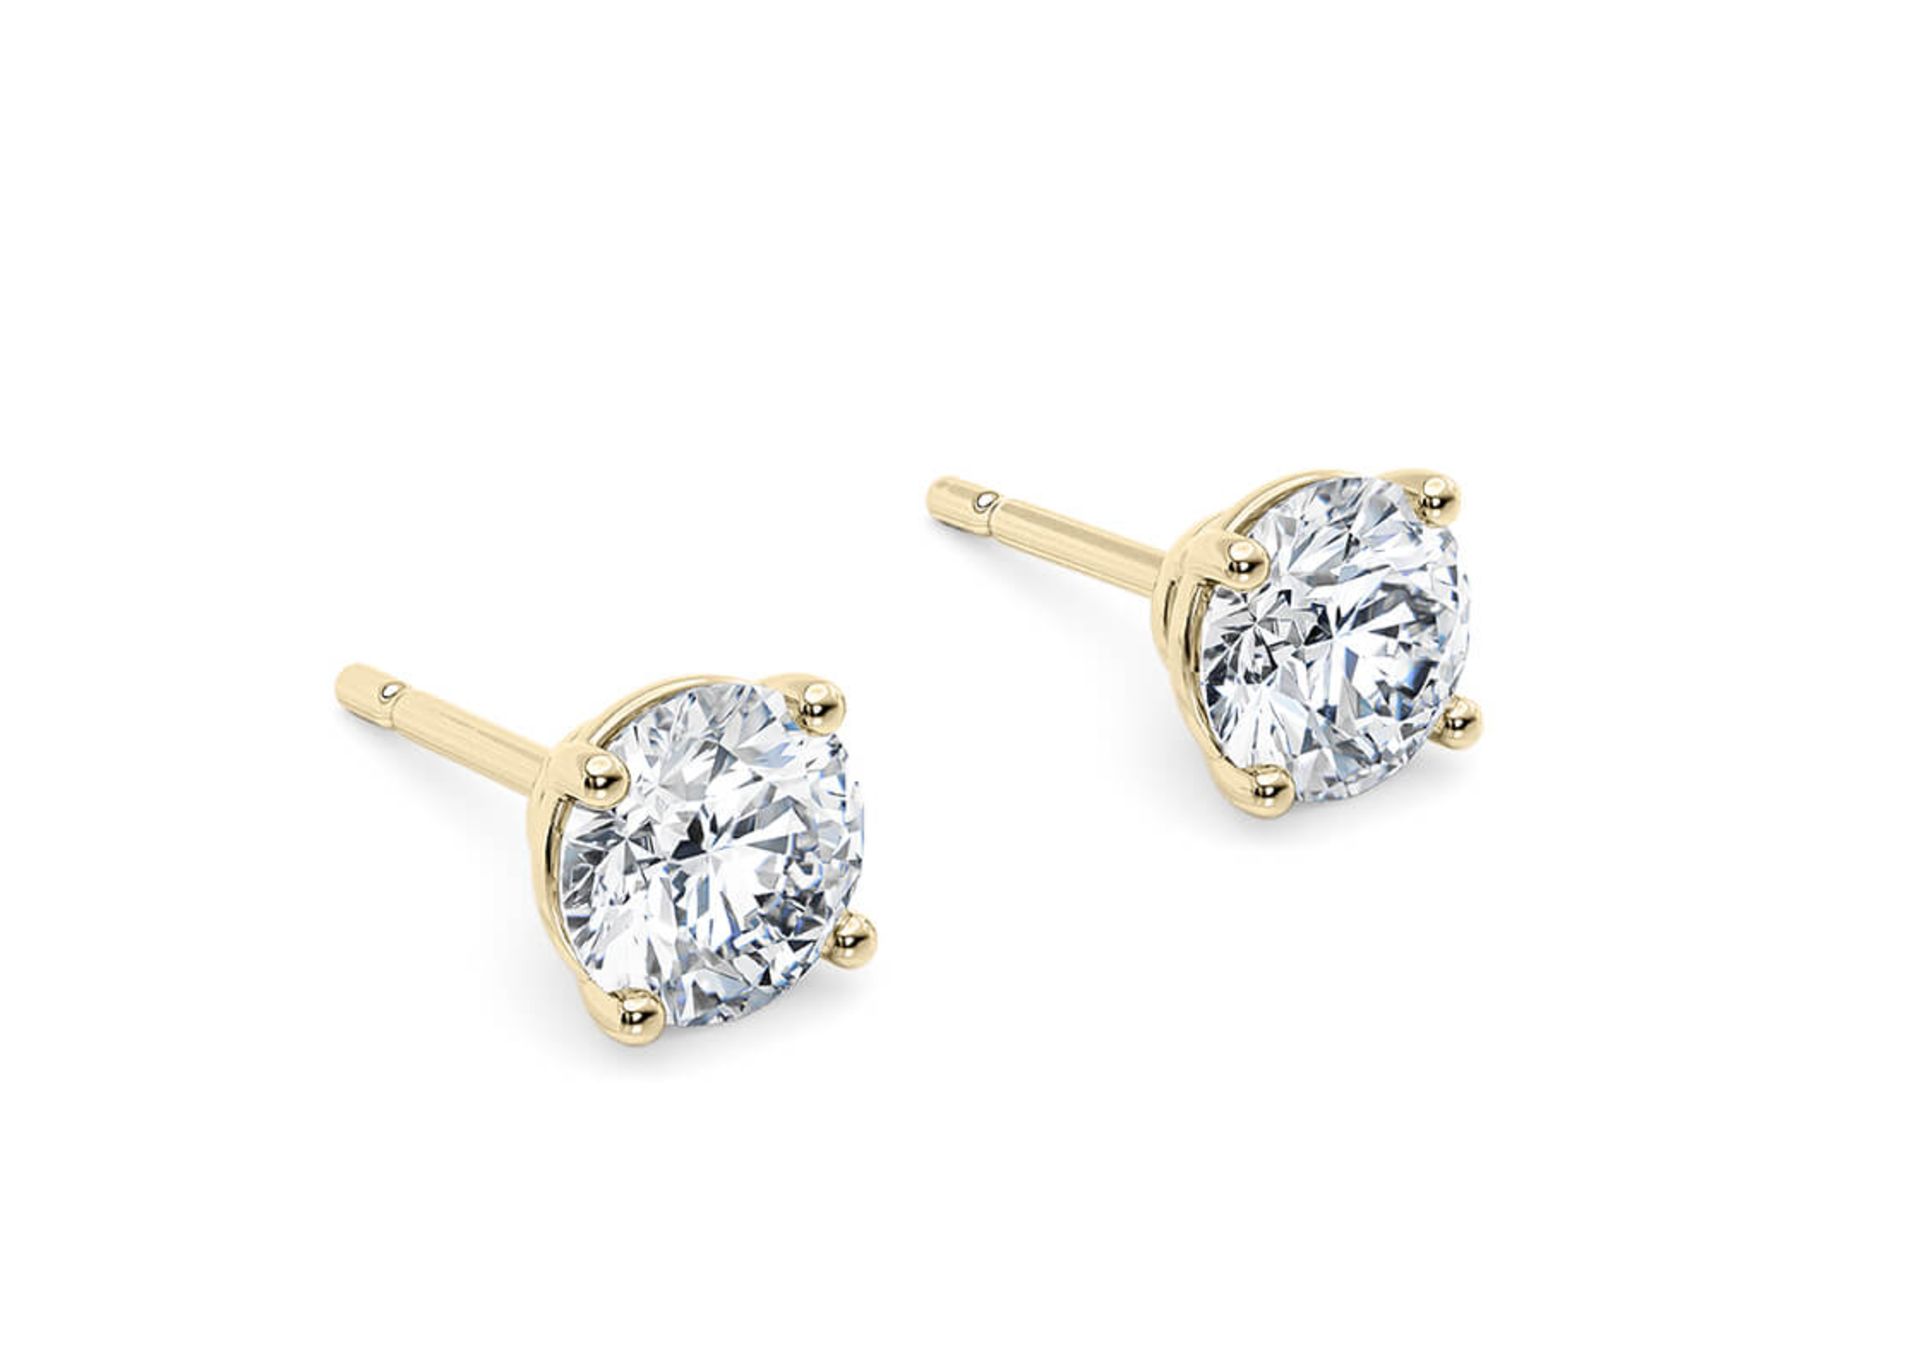 ** ON SALE ** Round Brilliant Cut 3.00 Carat Diamond Earrings Set in 18kt Yellow Gold - E Colour VS - Image 2 of 3